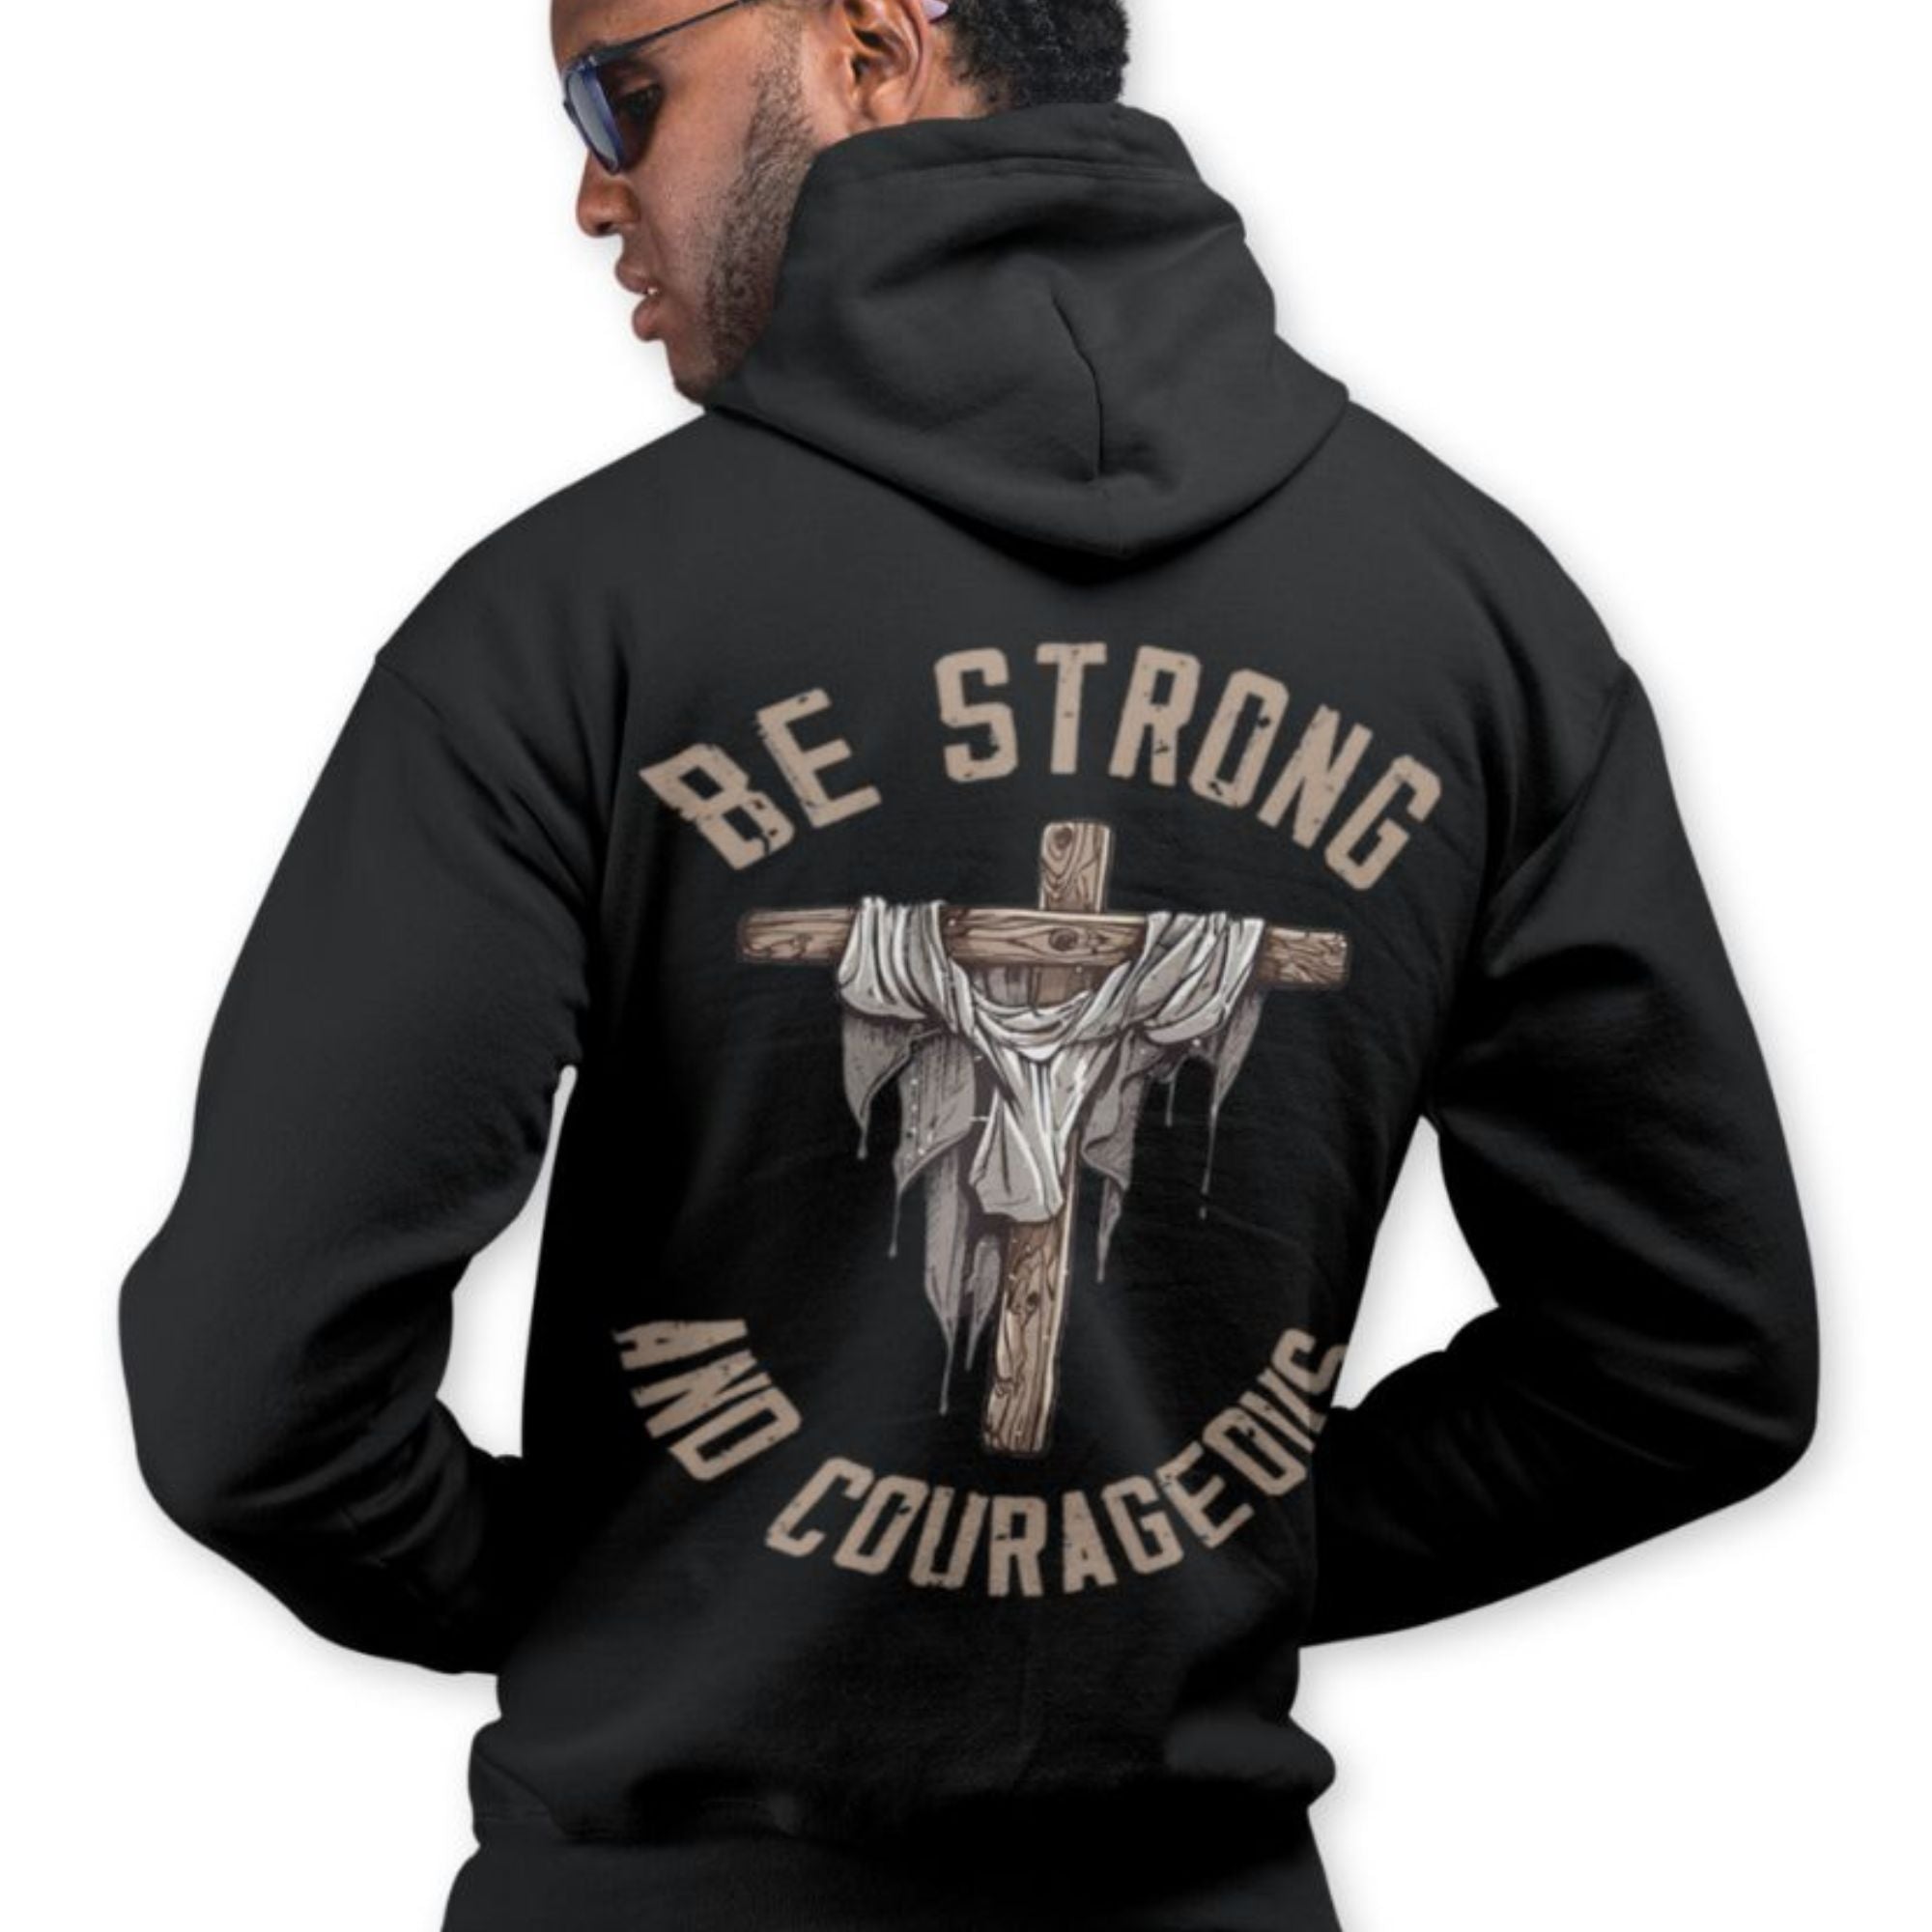 Be Strong and Courageous Retro-Inspired Premium Men's Jacket Heavy Blend™ Hoodie Size: S Color: Black Jesus Passion Apparel